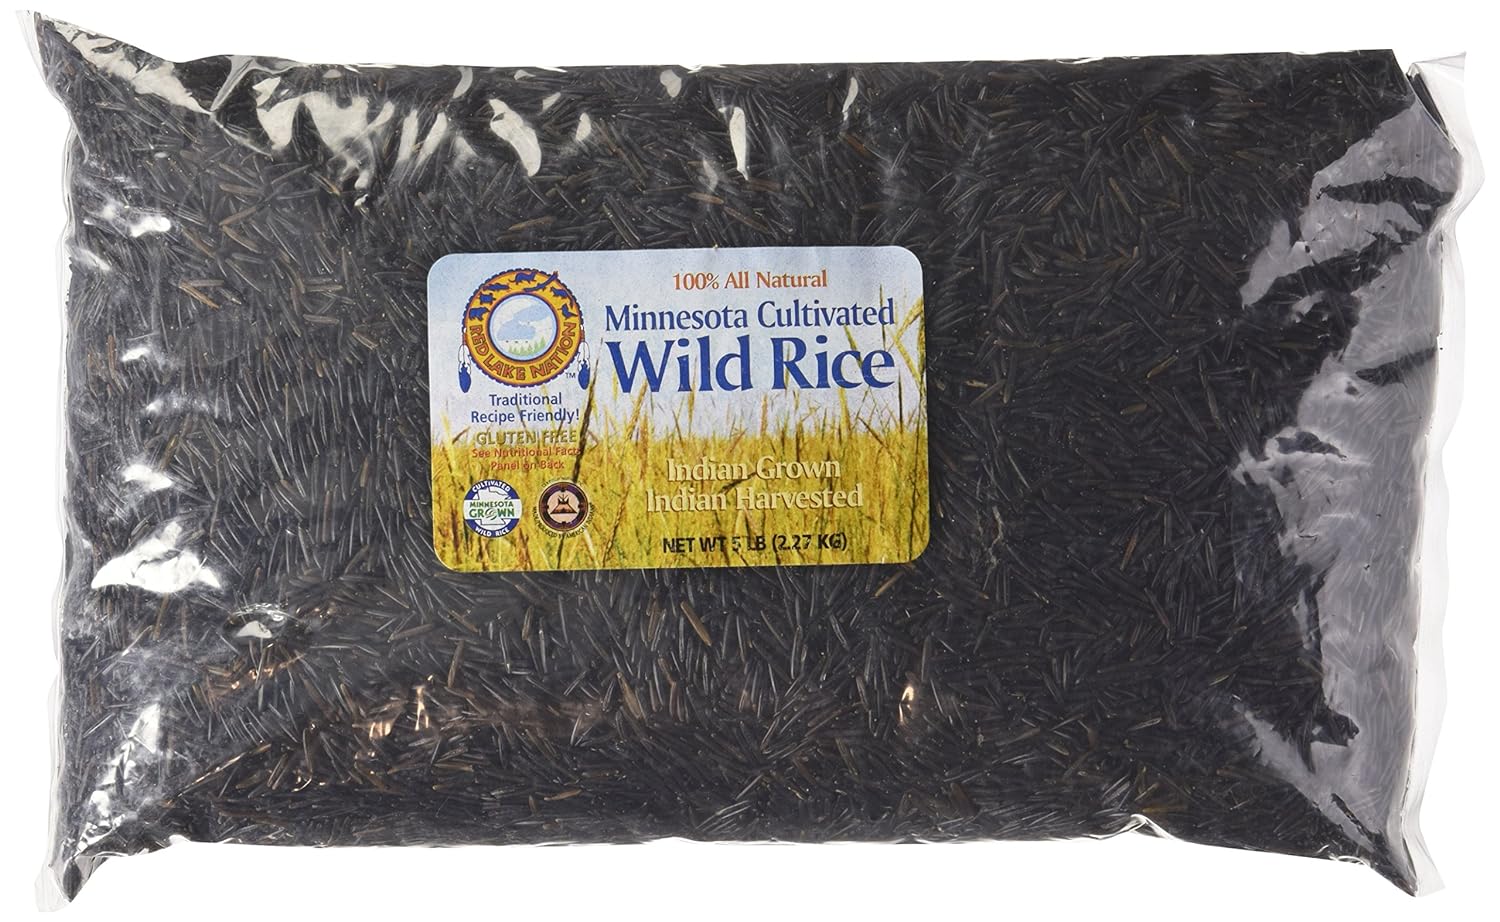 This appears to be authentic, long grain, wild rice. So many things to love about wild rice and its nutritional benefits. Take time to read about it. Great value for 5# bag. Soups, casseroles, hotdishes, quiche, etc. There's so many fantastic ways to use it!